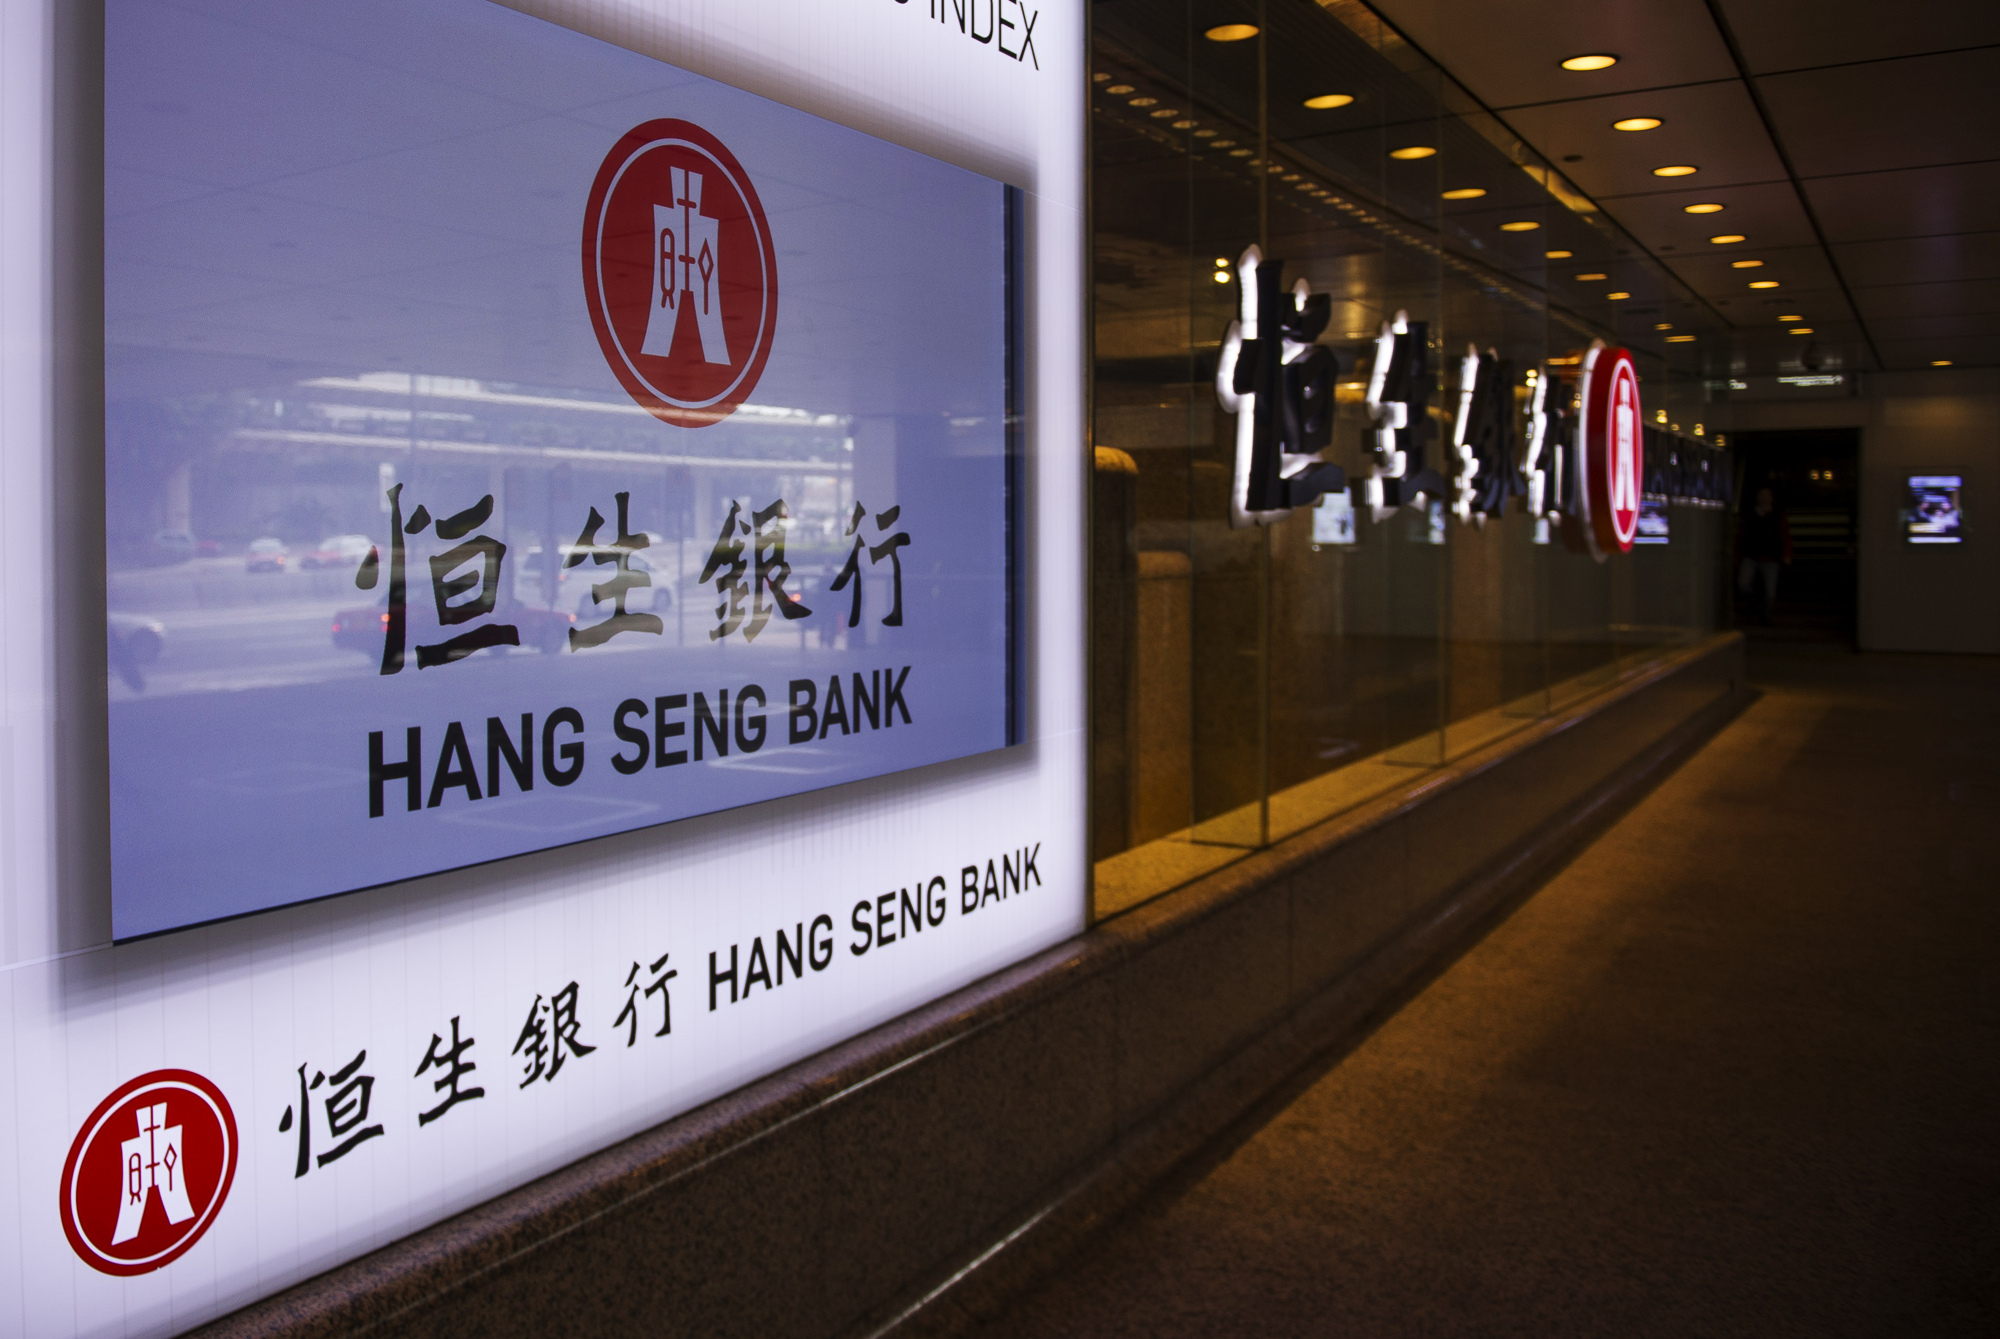 Signage for Hang Seng Bank Ltd. is displayed on a television monitor at the bank's headquarters in Hong Kong, China, on Monday, Feb. 22, 2016. Shares of Hang Seng Bank, the Hong Kong lender controlled by HSBC Holdings Plc, jumped as much as 3.6 percent after the bank proposed to pay a special dividend.